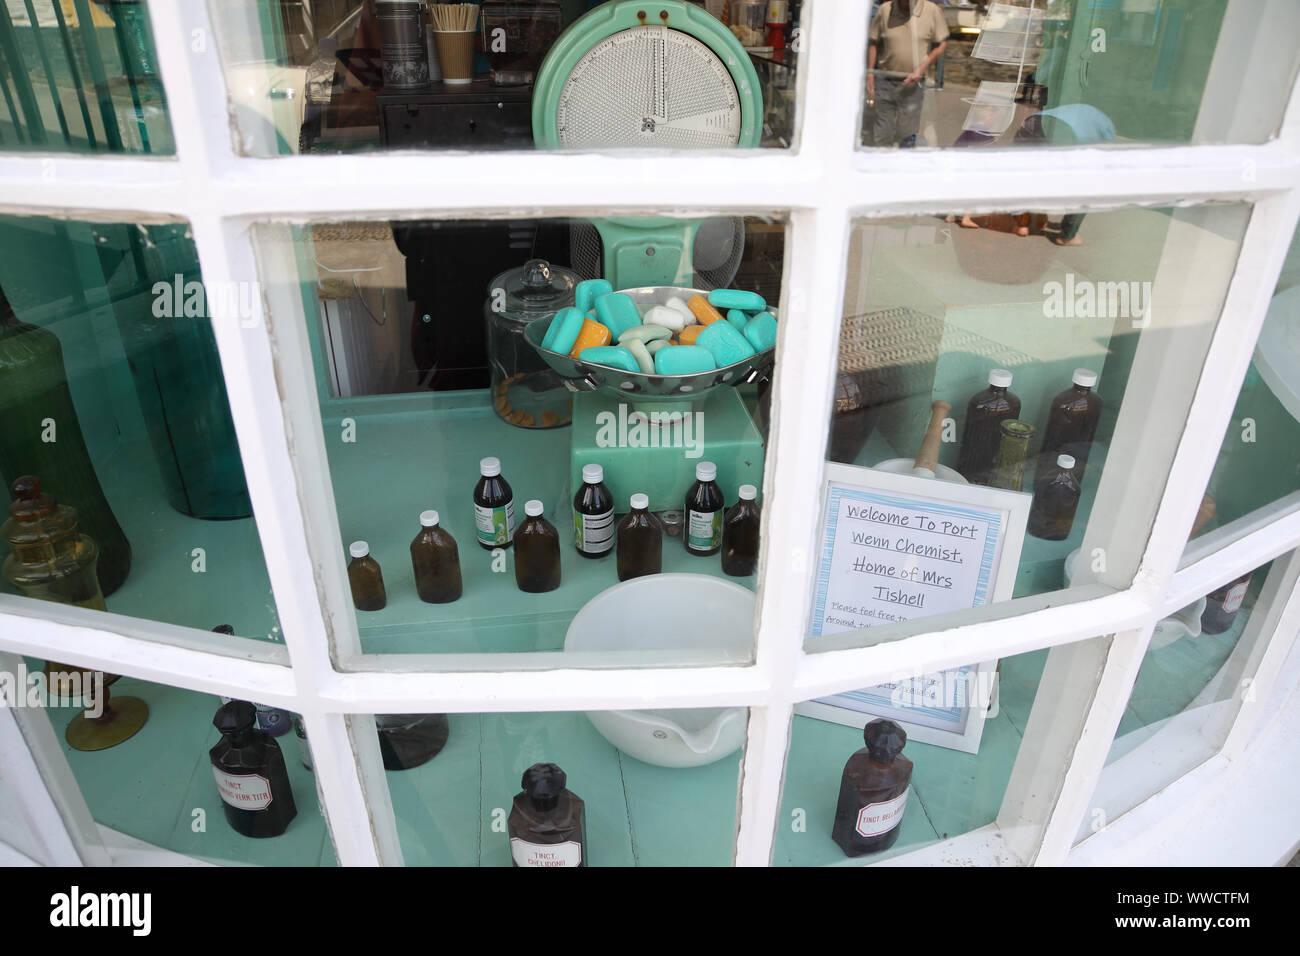 Shop window at Port Isaac used as Mrs Tishell's chemist window ay Port Wenn in the Tv series Doc Martin Stock Photo